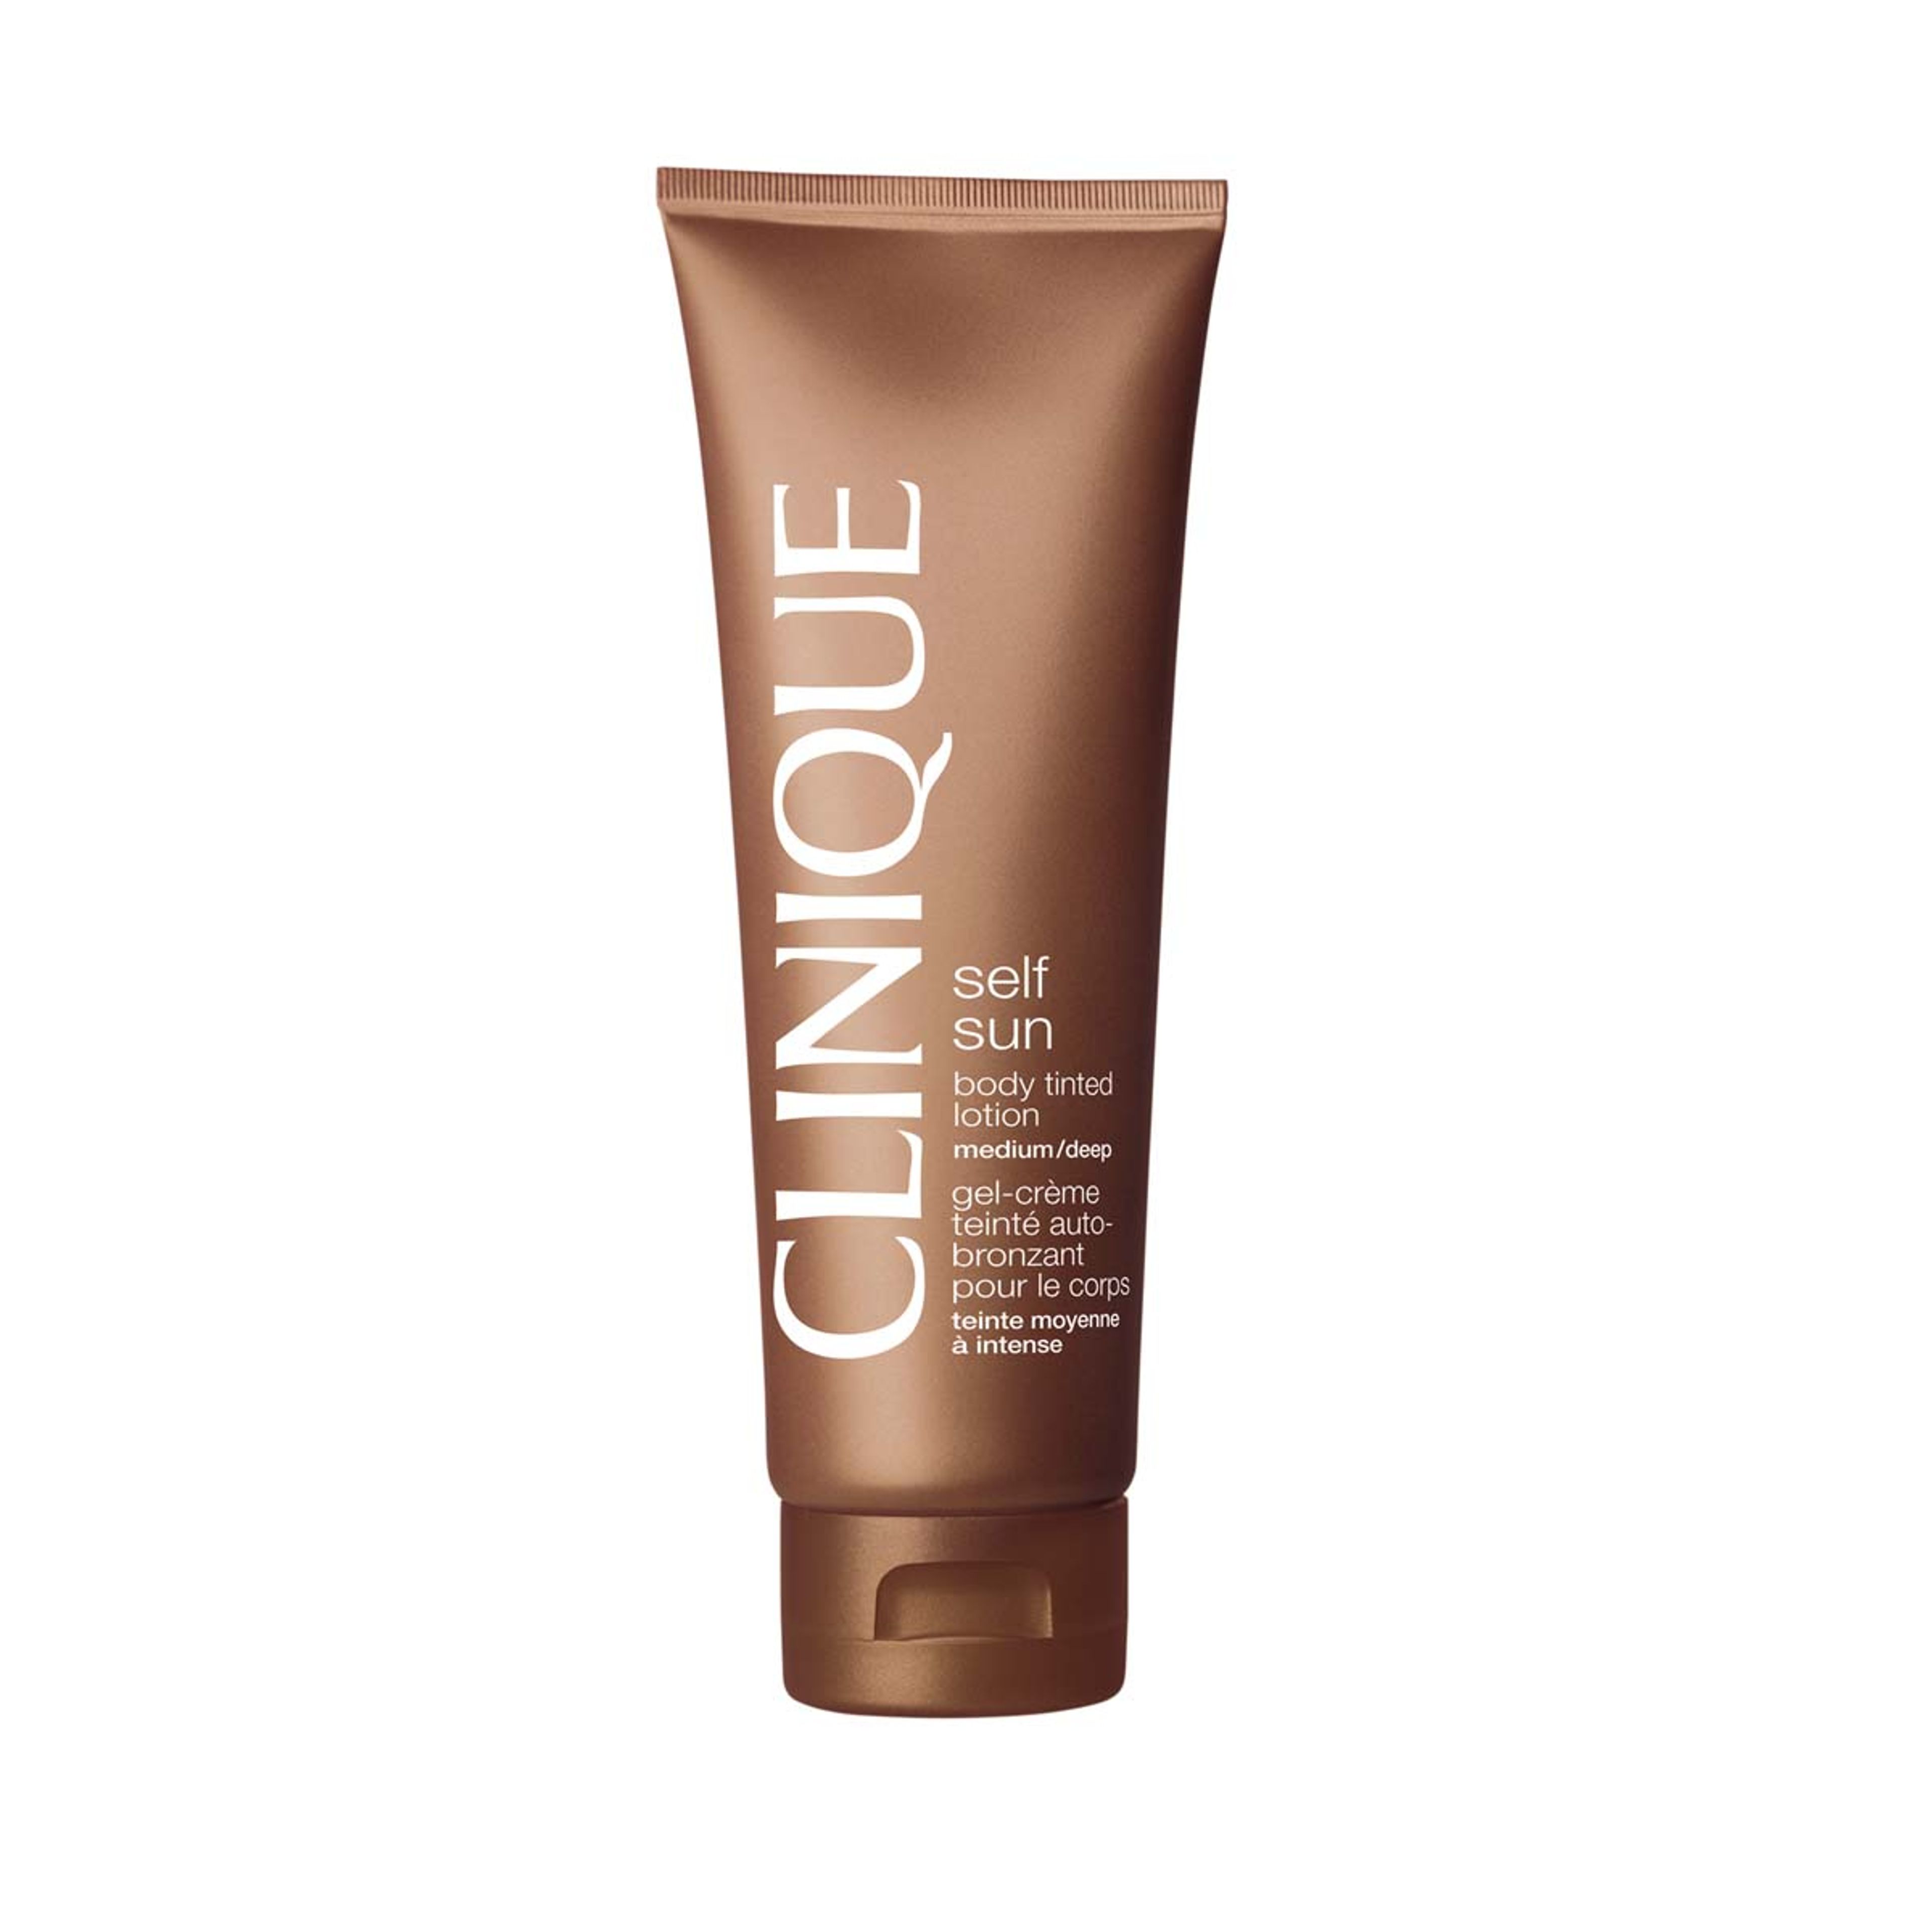 Clinique Self Sun Body Tinted Lotion 1